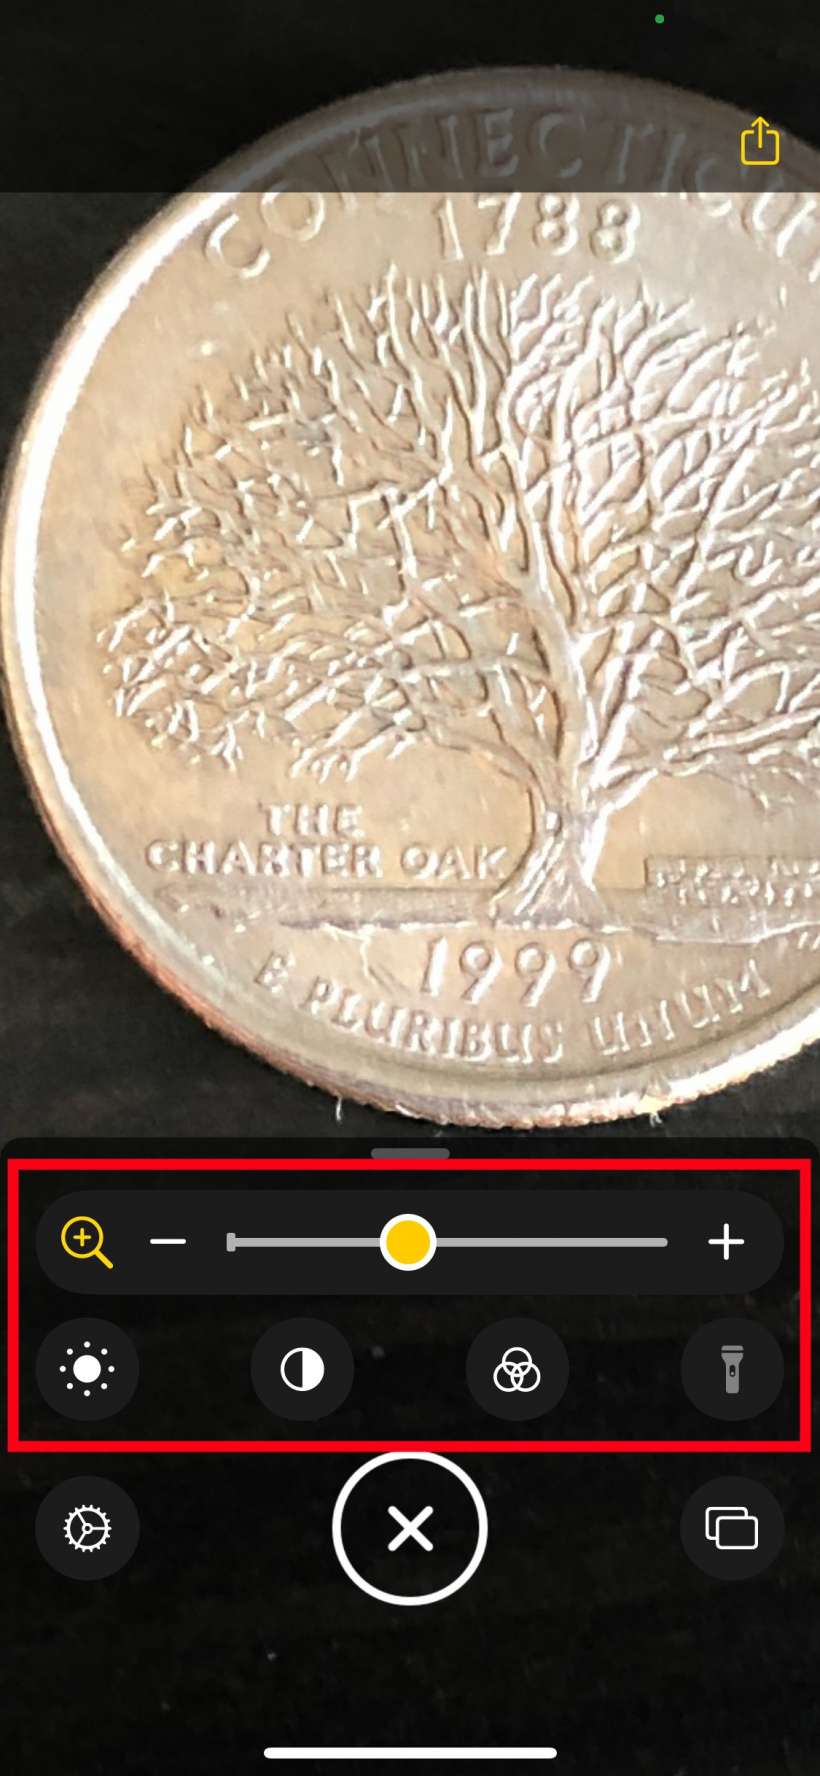 How to use the updated magnifier in iOS 14 on iPhone and iPad.